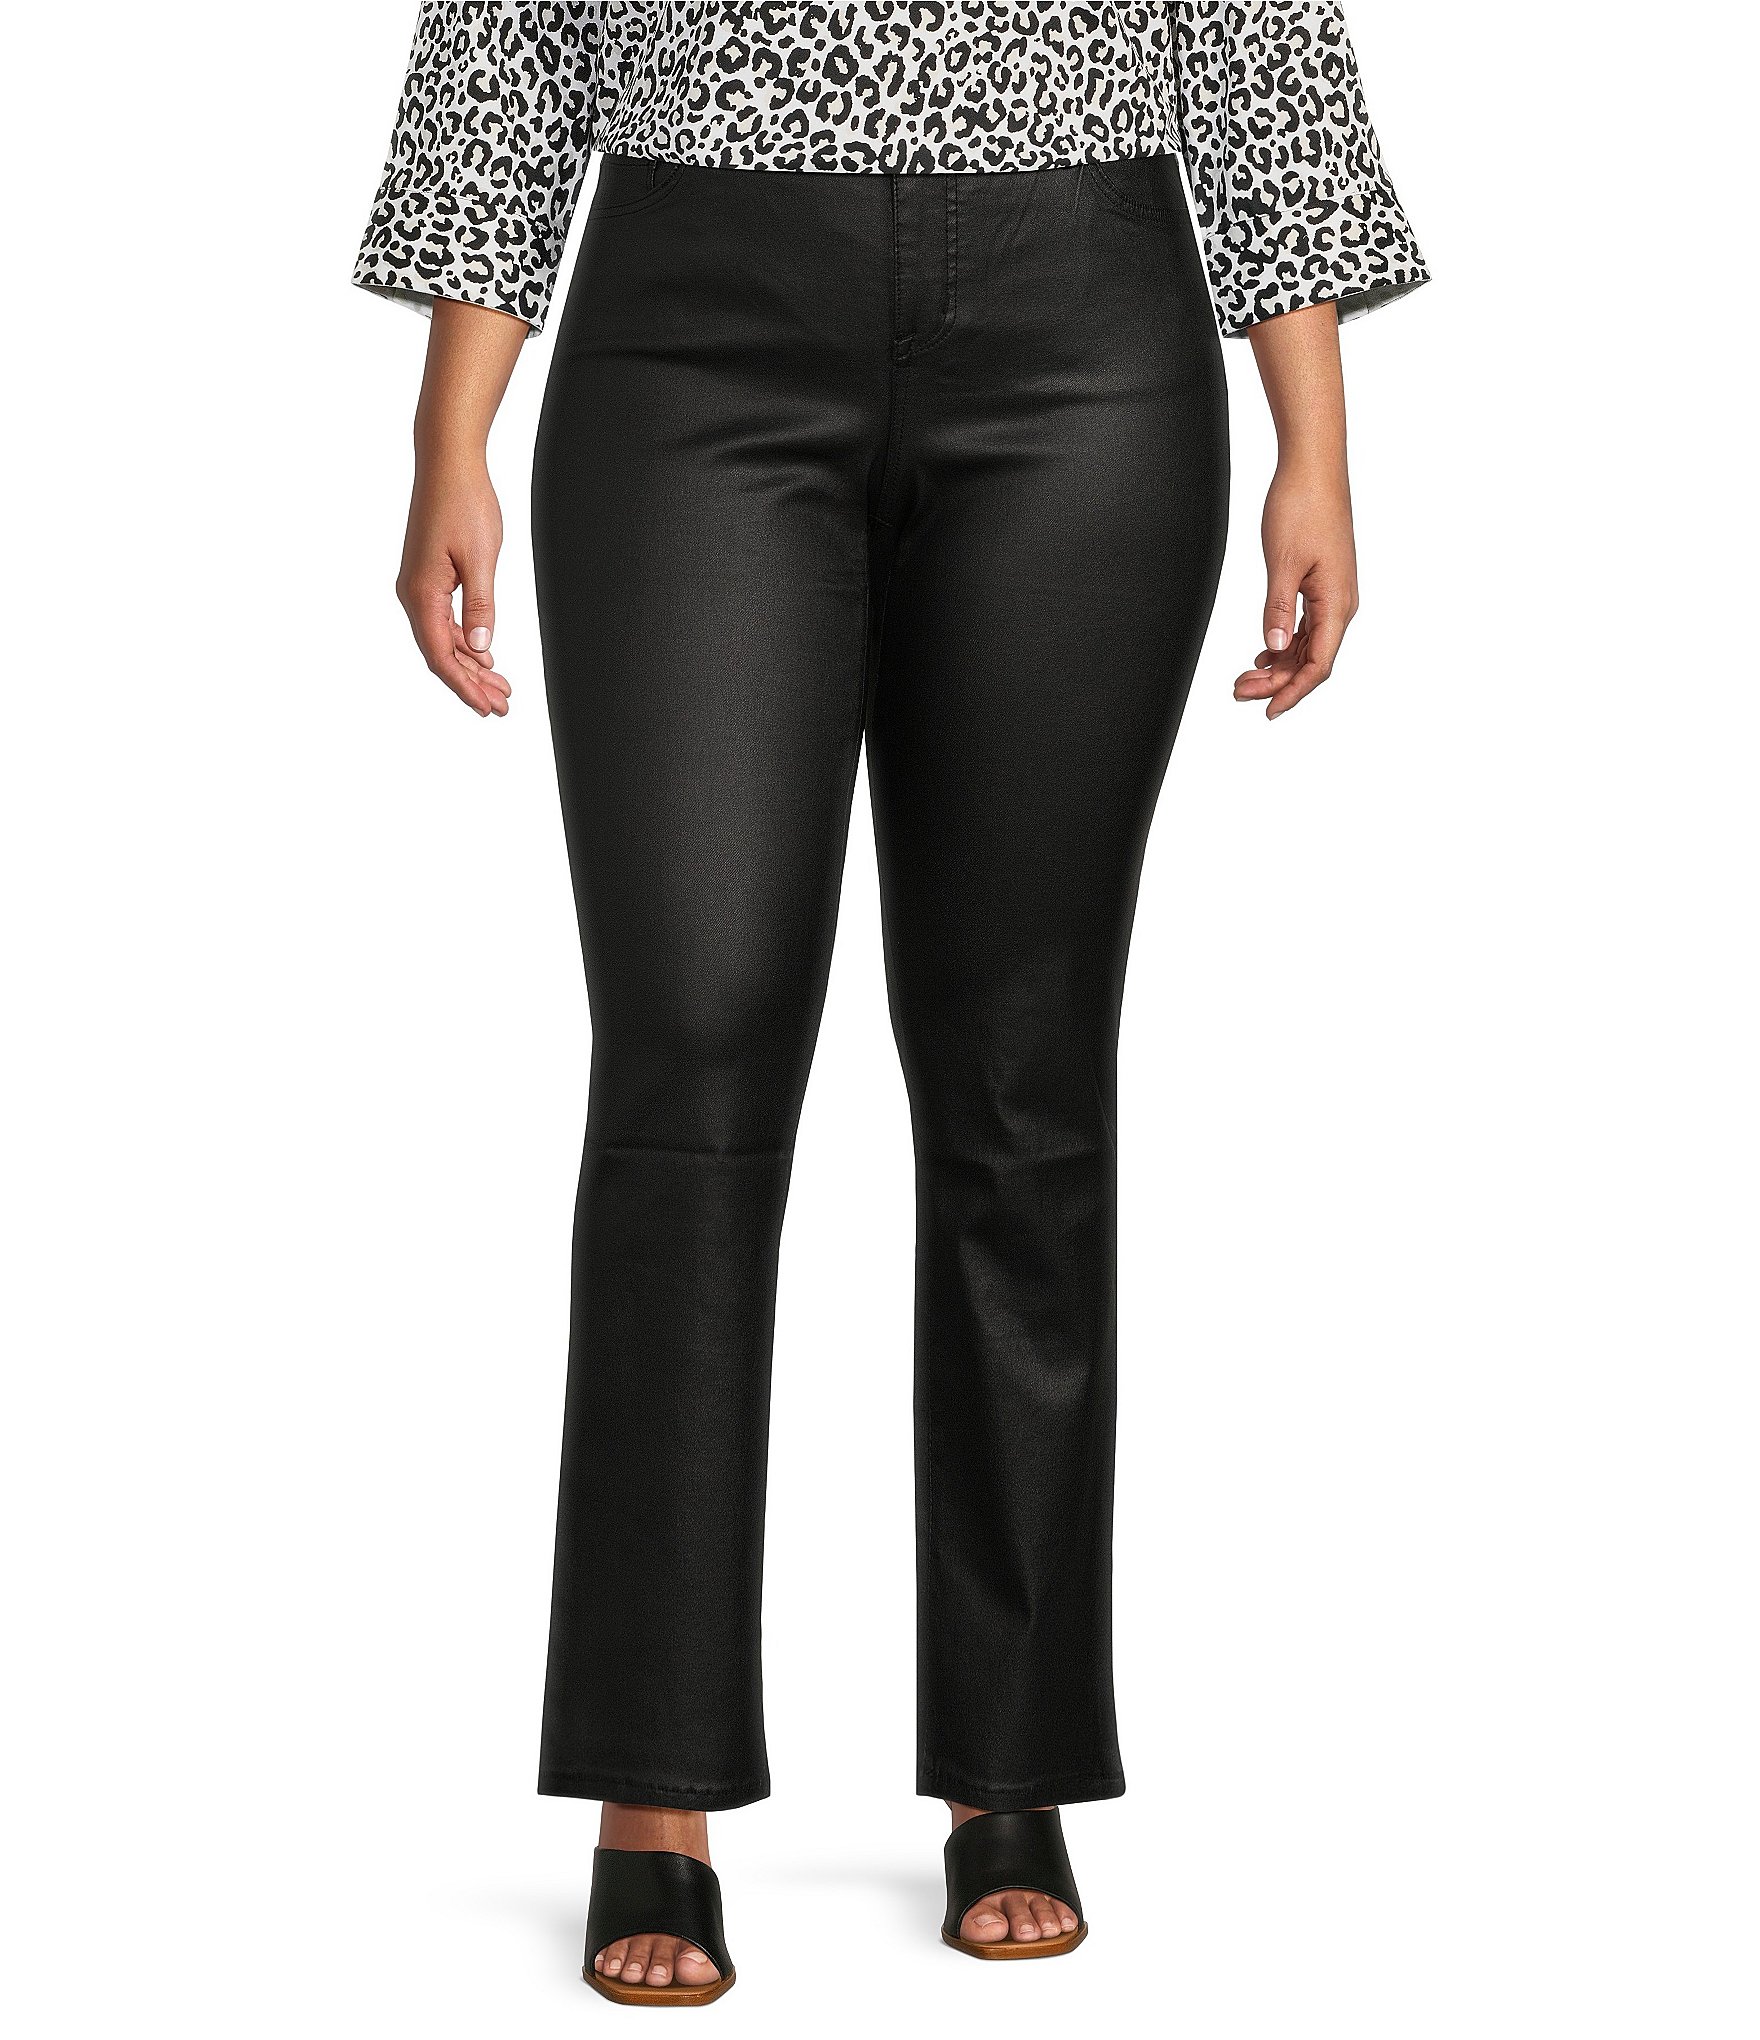 casual pants: Women's Clothing & Apparel